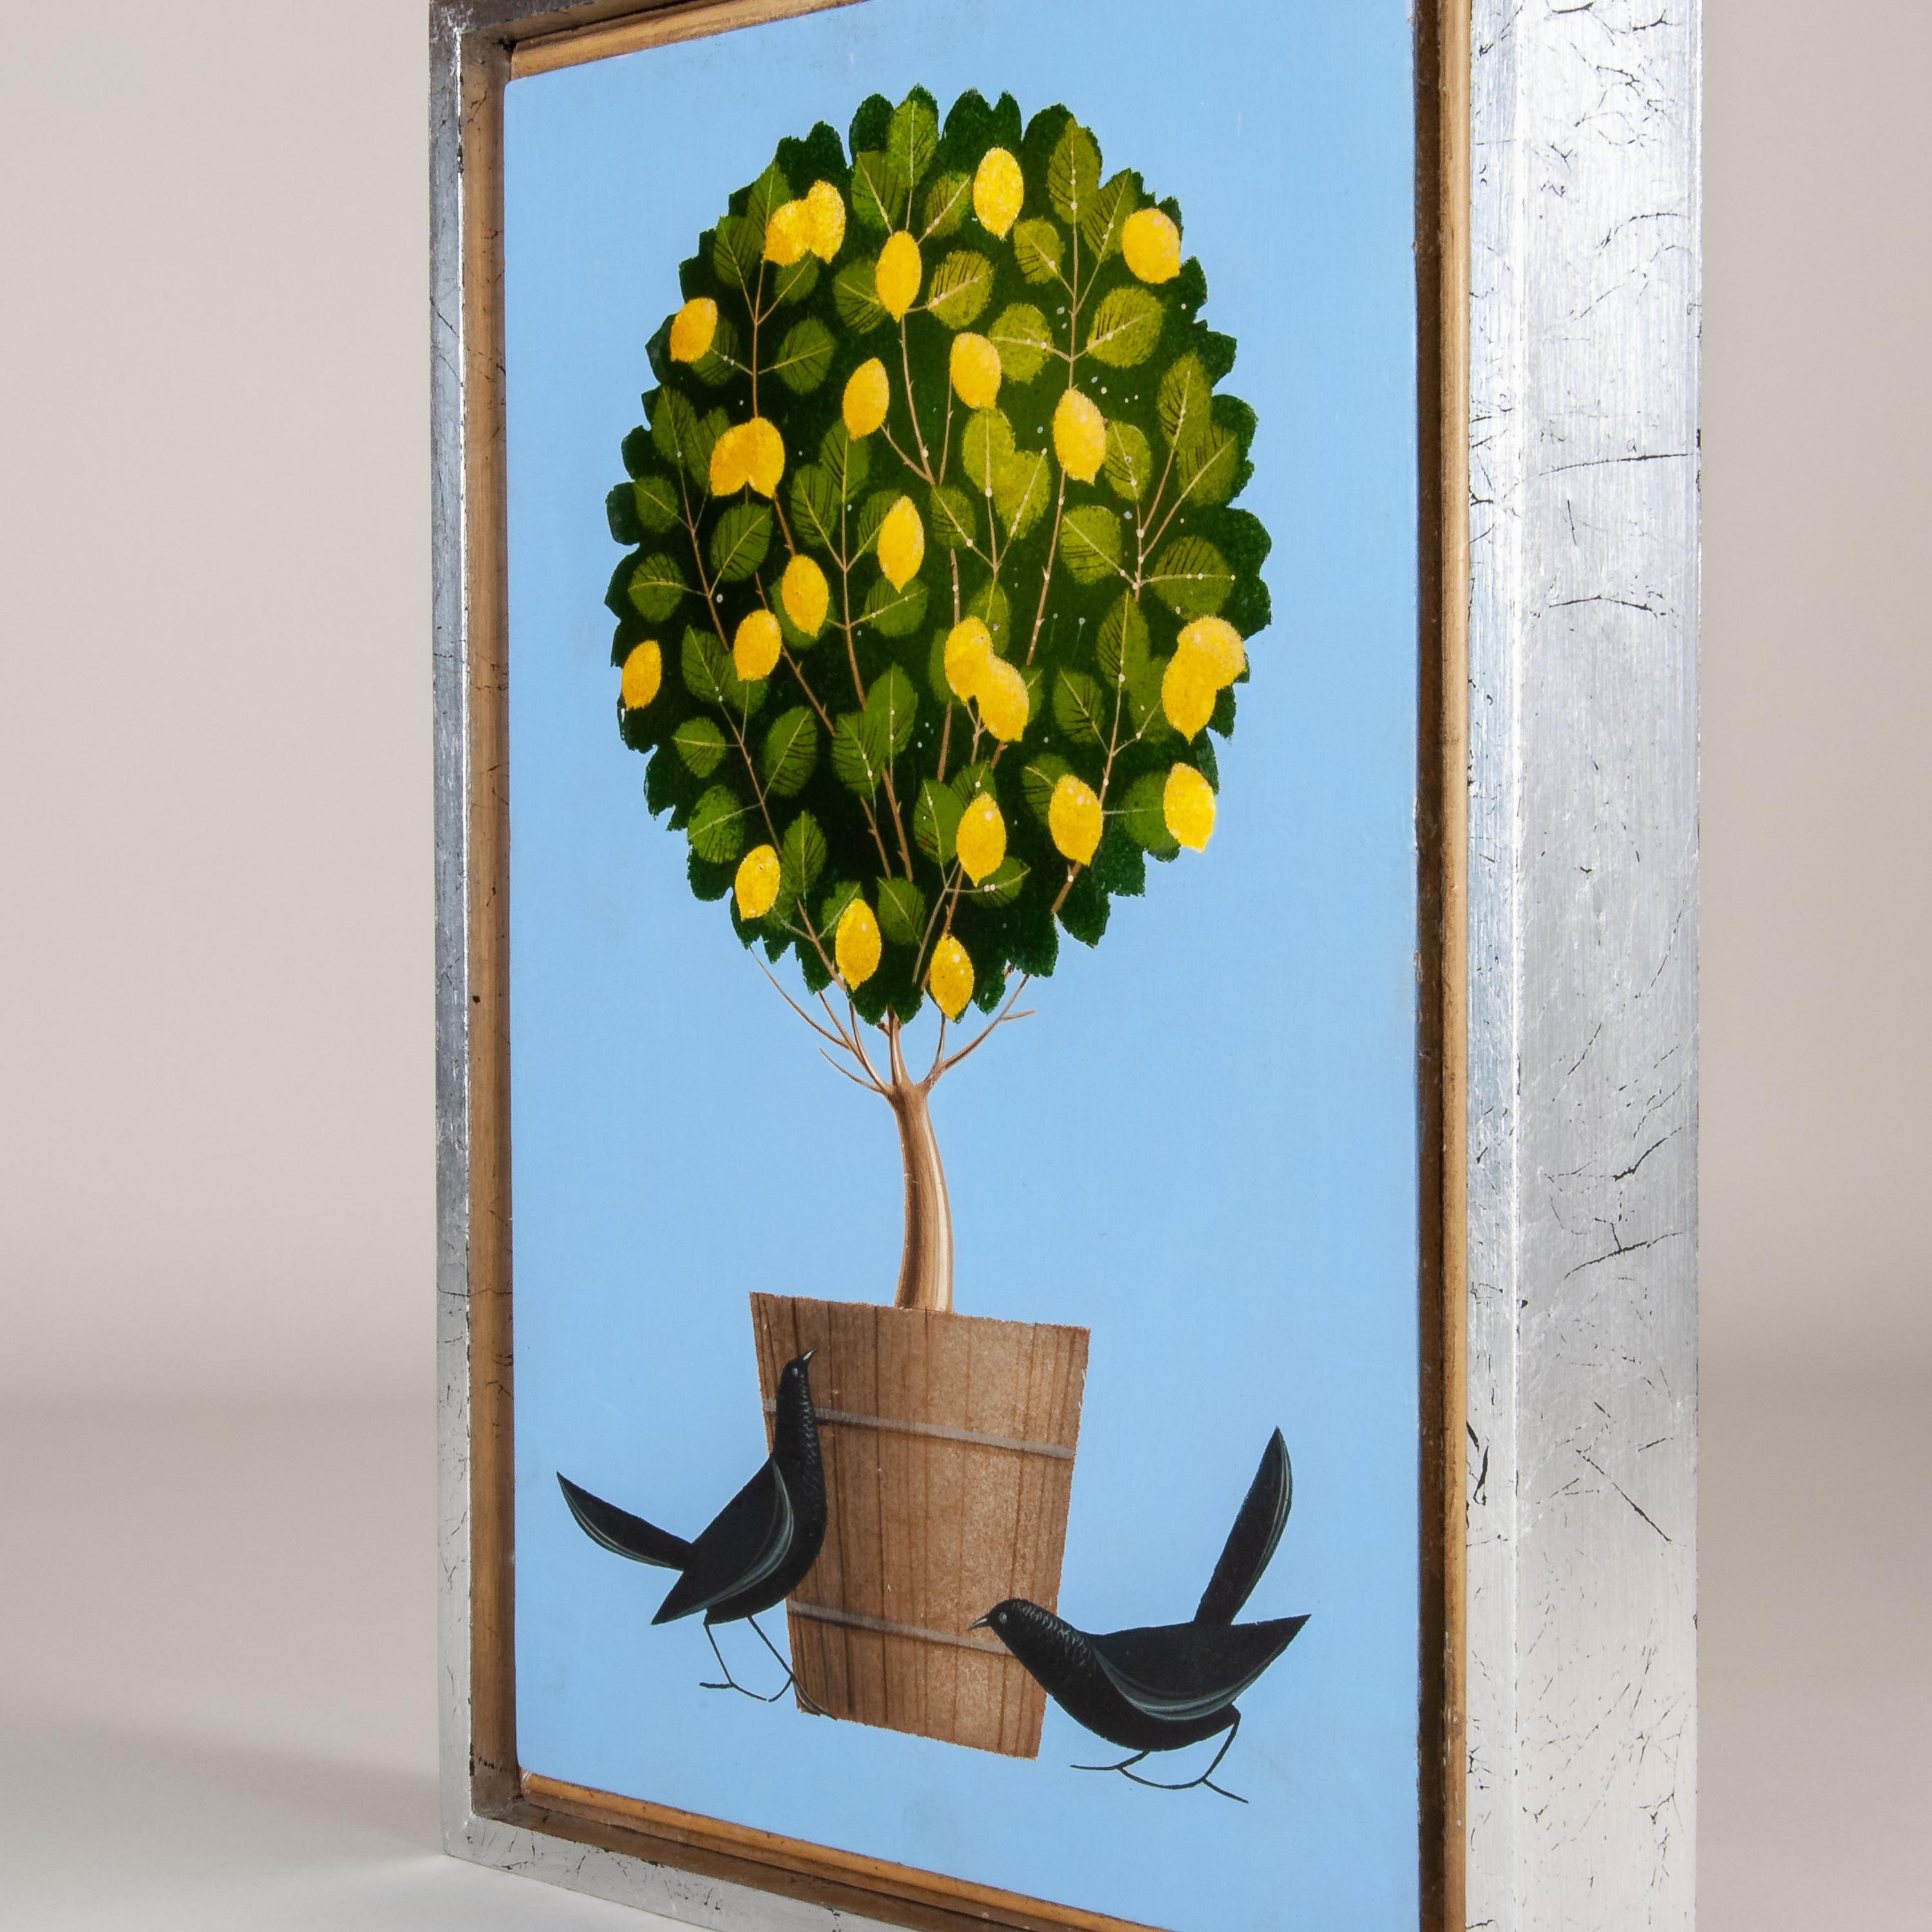 Original acrylic painting on wood with Two blackbirds and a pot with an orange tree against a blue background in square format by Alejandro Rangel Hidalgo. Rangel was an artist, graphic designer, an artisan in wood furniture, and Scenographer for